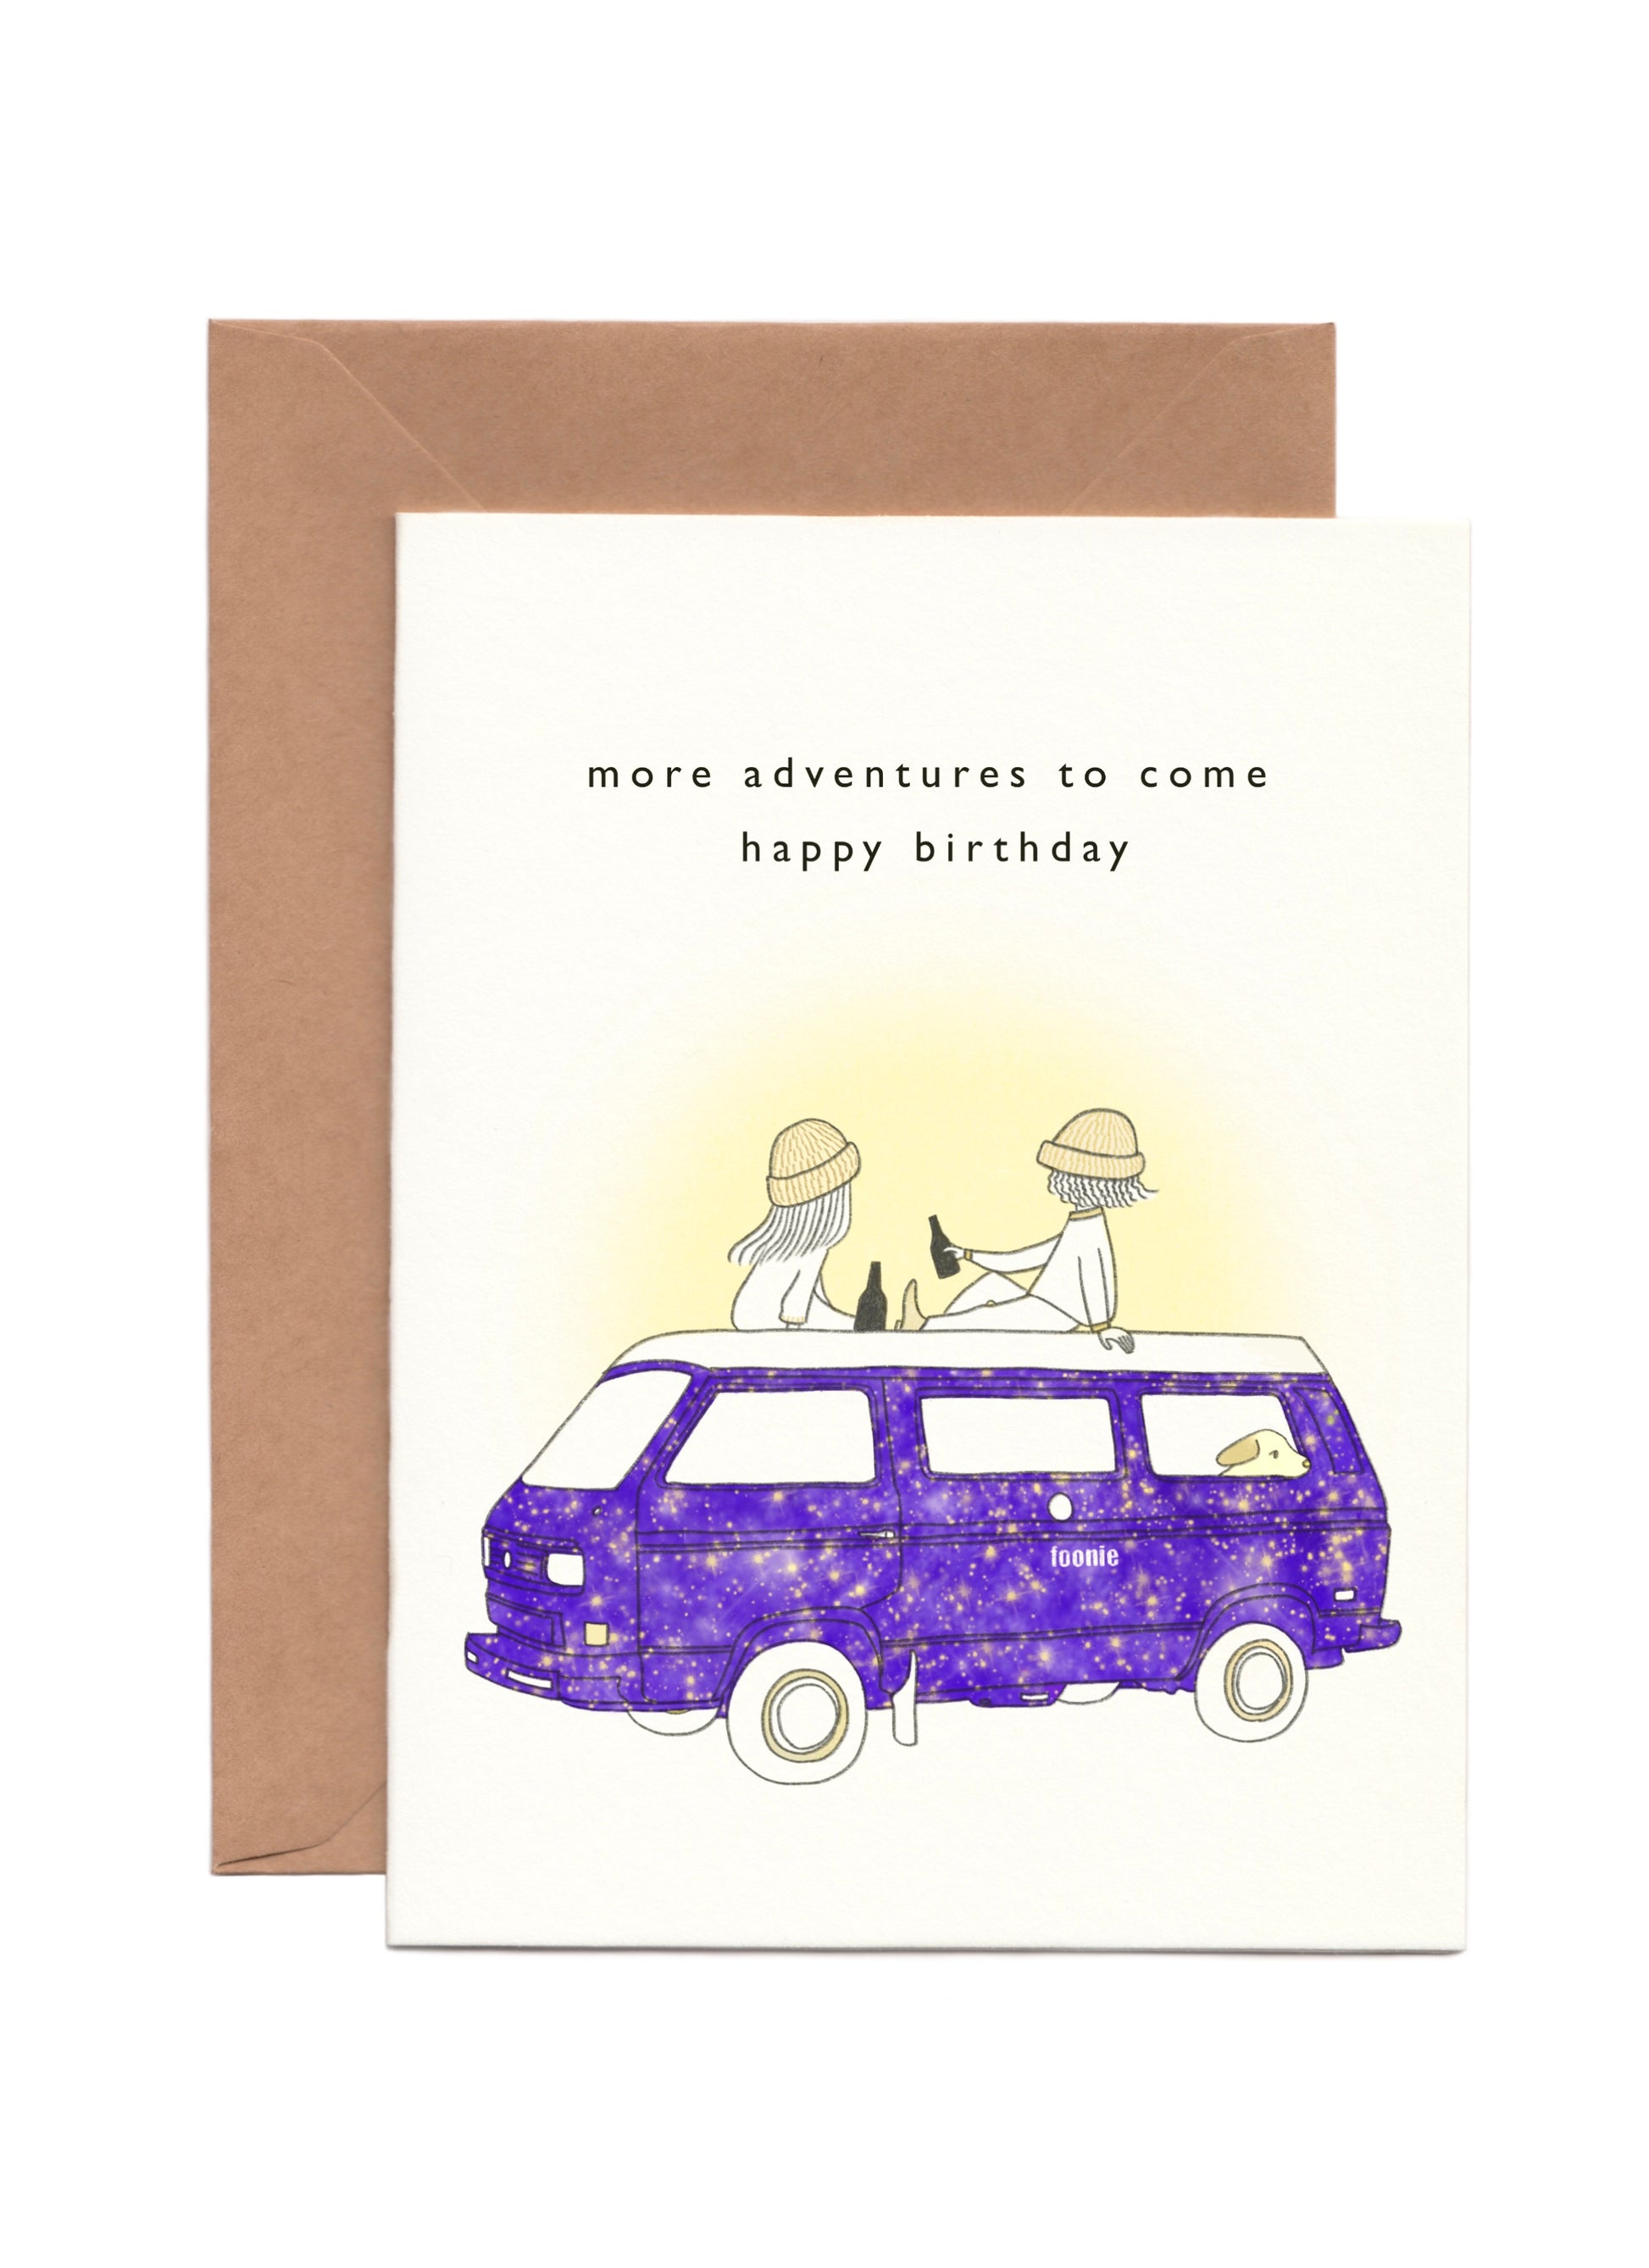 Dreamy Birthday Card with a hipster couple on the roof of a classic camper van with the design of universe paint job